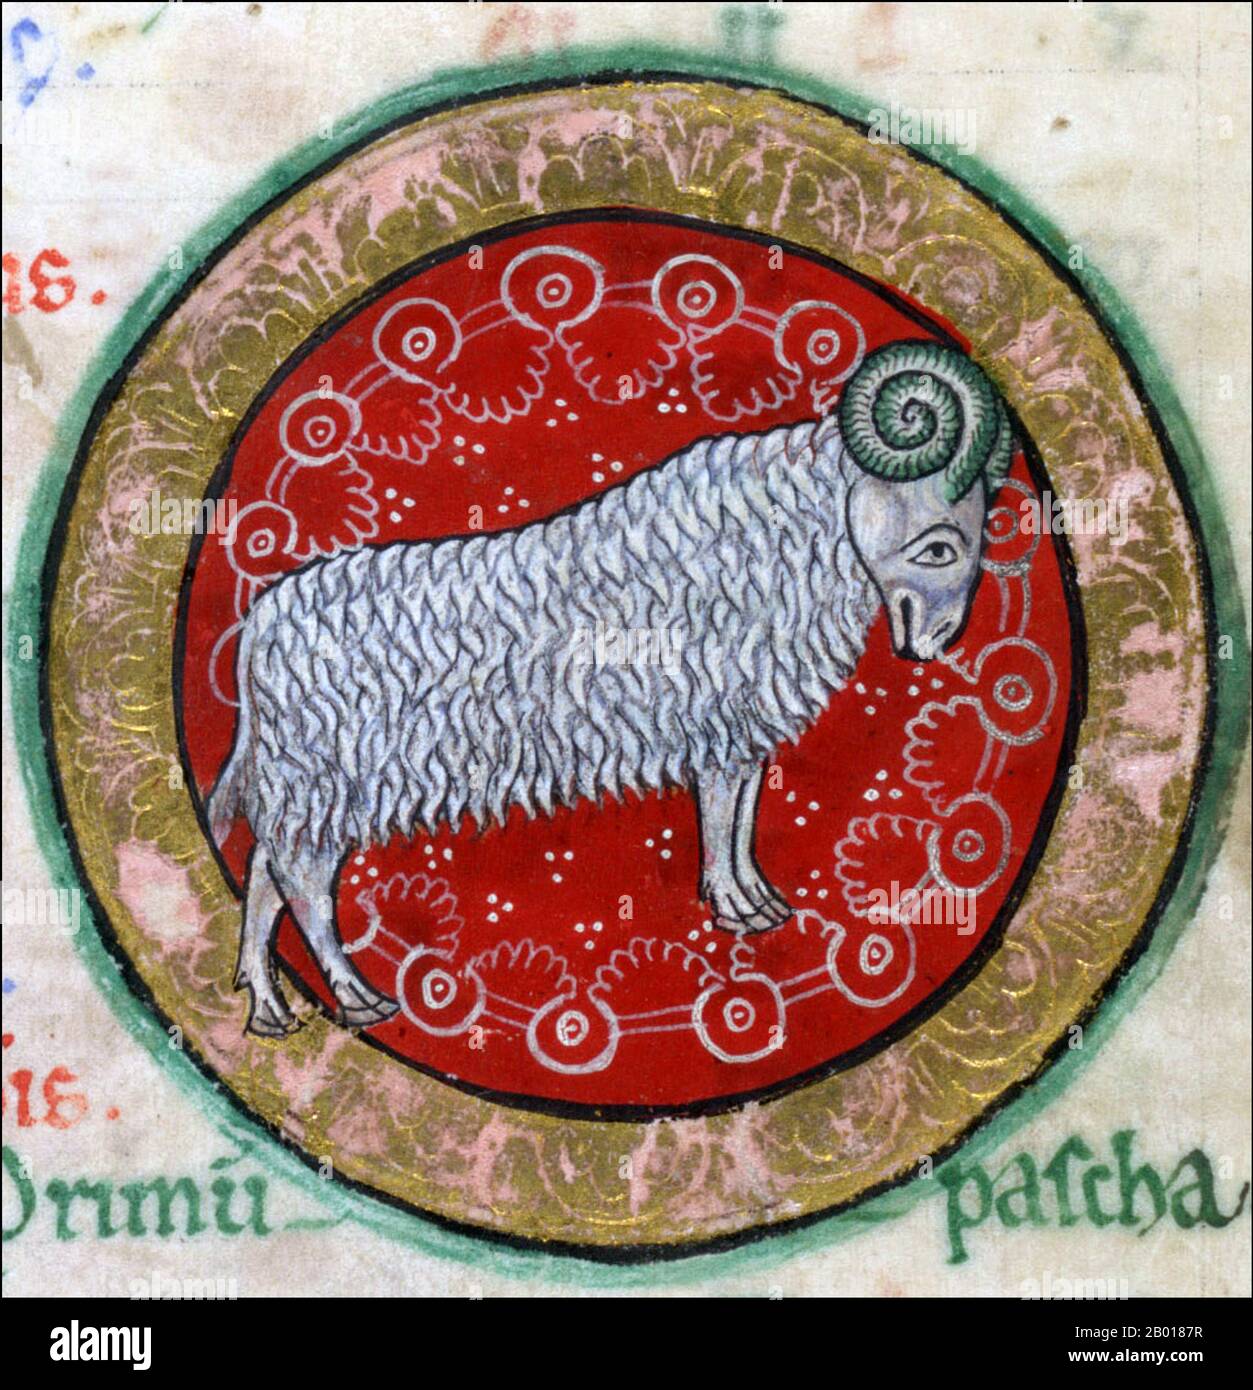 England: Zodiacal symbol for Aries as represented in the Hunterian Psalter, c. 1170.  The Hunterian Psalter (or York Psalter) is an illuminated manuscript of the 12th century. It was produced in England some time around 1170, and is considered a striking example of Romanesque book art. The work is part of the collection of the Glasgow University Library, which acquired the book in 1807. It derives its colloquial name, the 'Hunterian Psalter', from having been part of the collection of 18th century Scottish anatomist and book collector William Hunter. Stock Photo